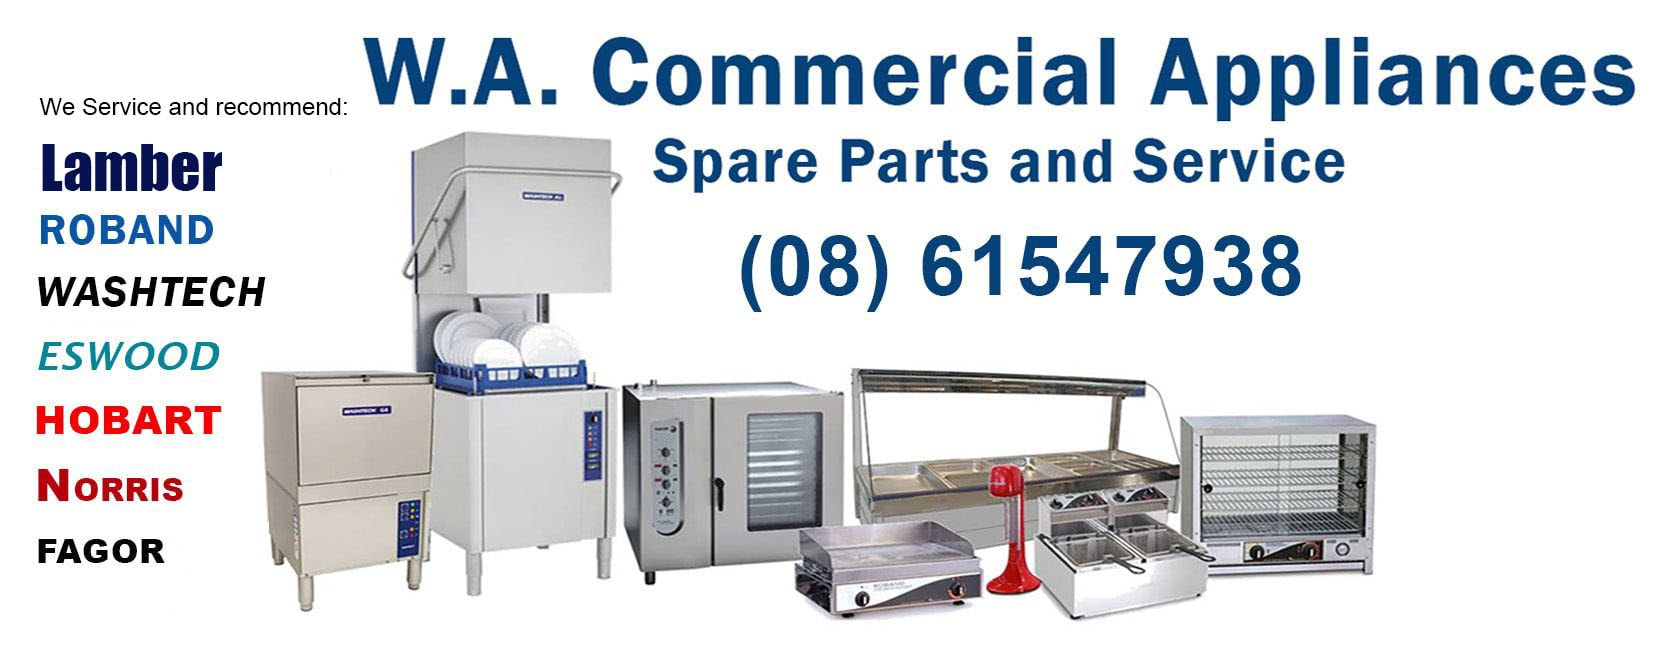 Commercial Appliance Spare Parts